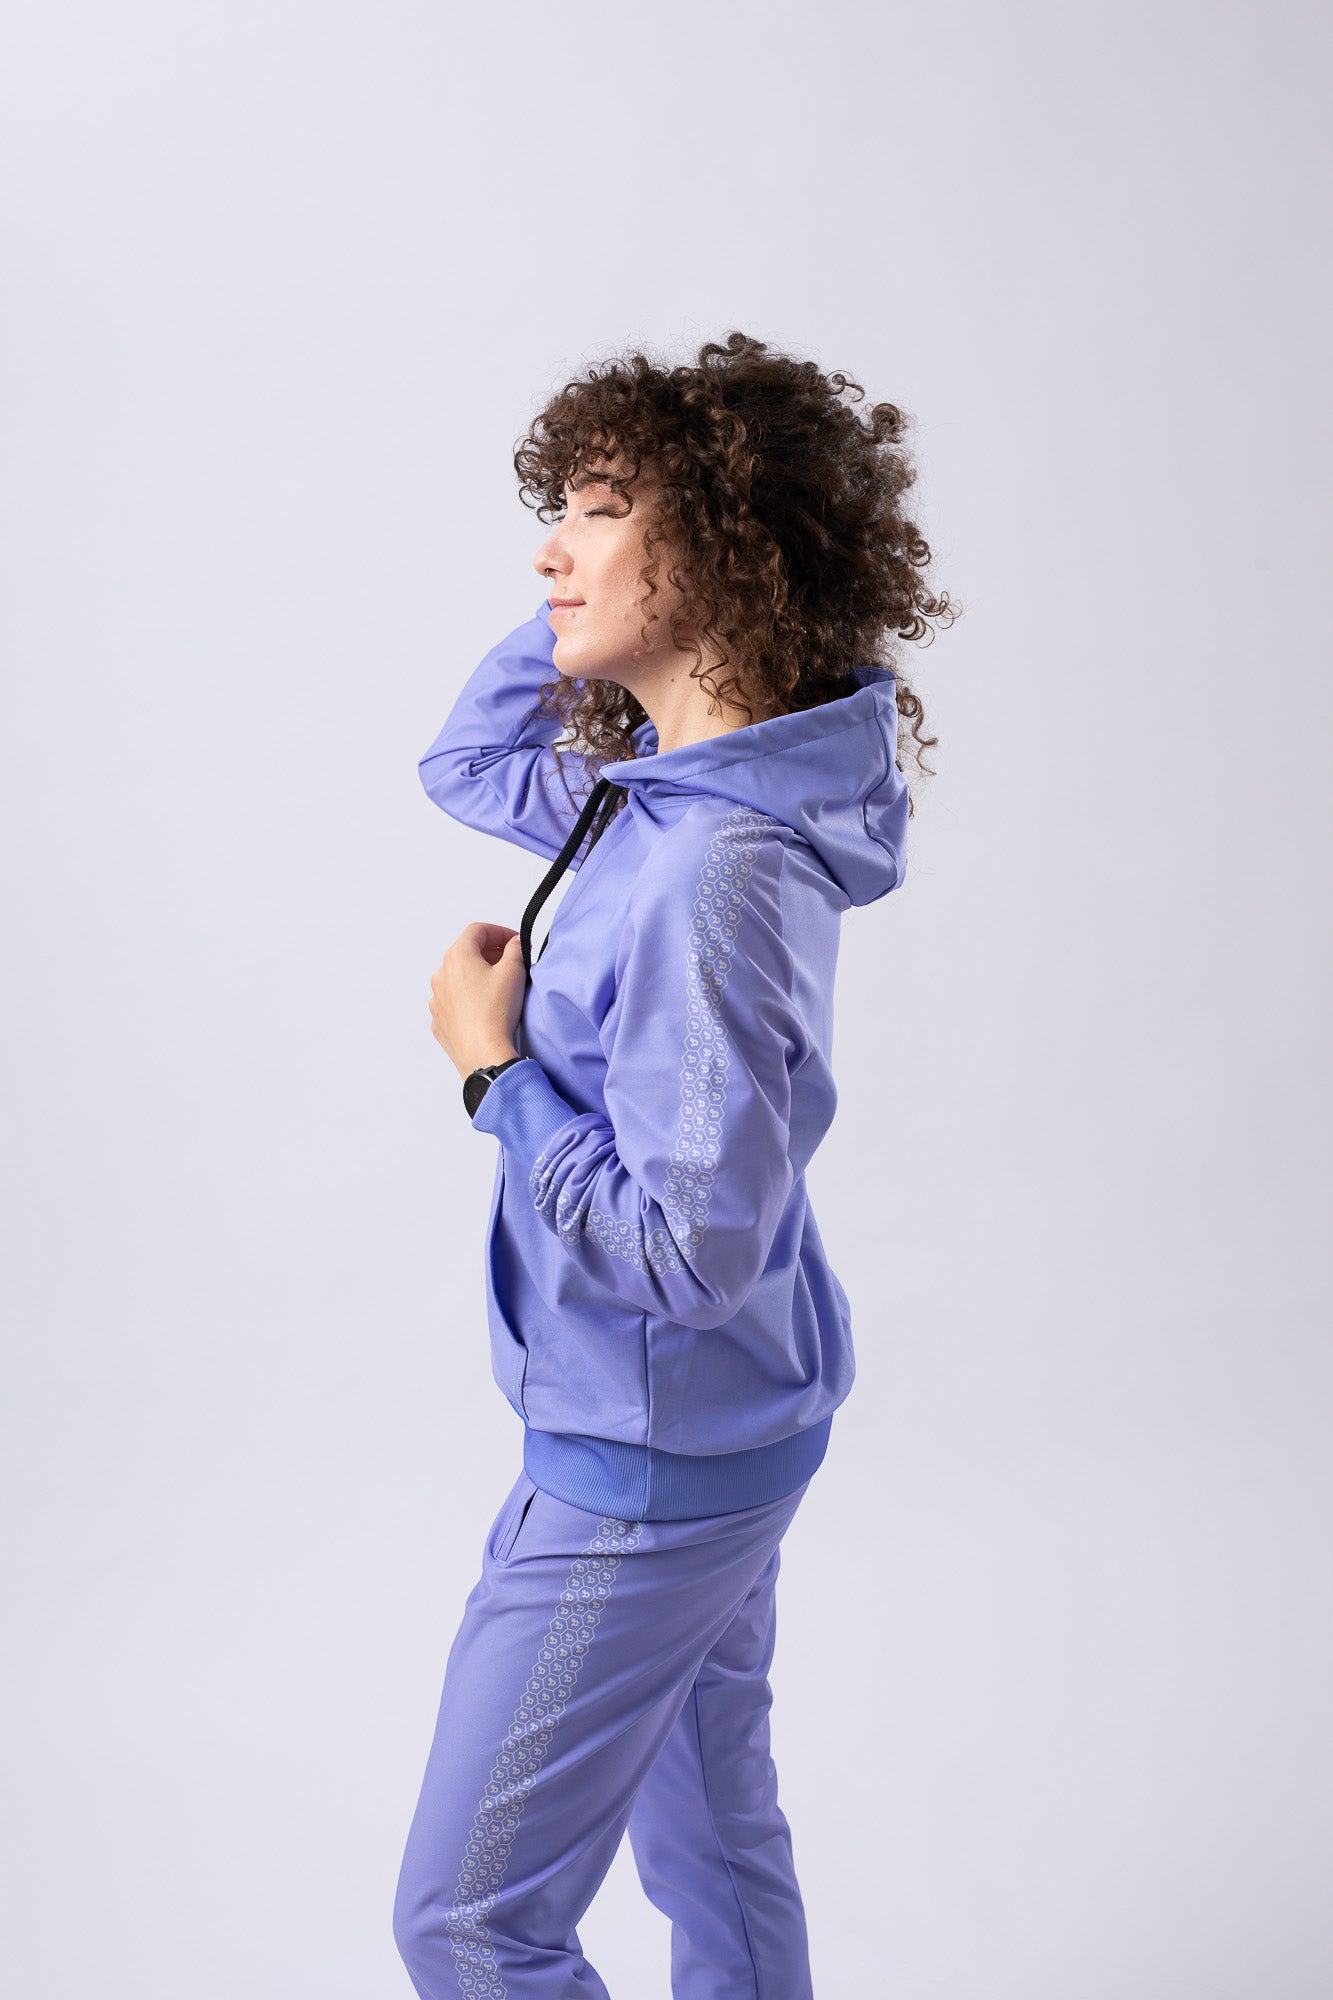 CoreD Pullover - Women's - Very Peri Collection